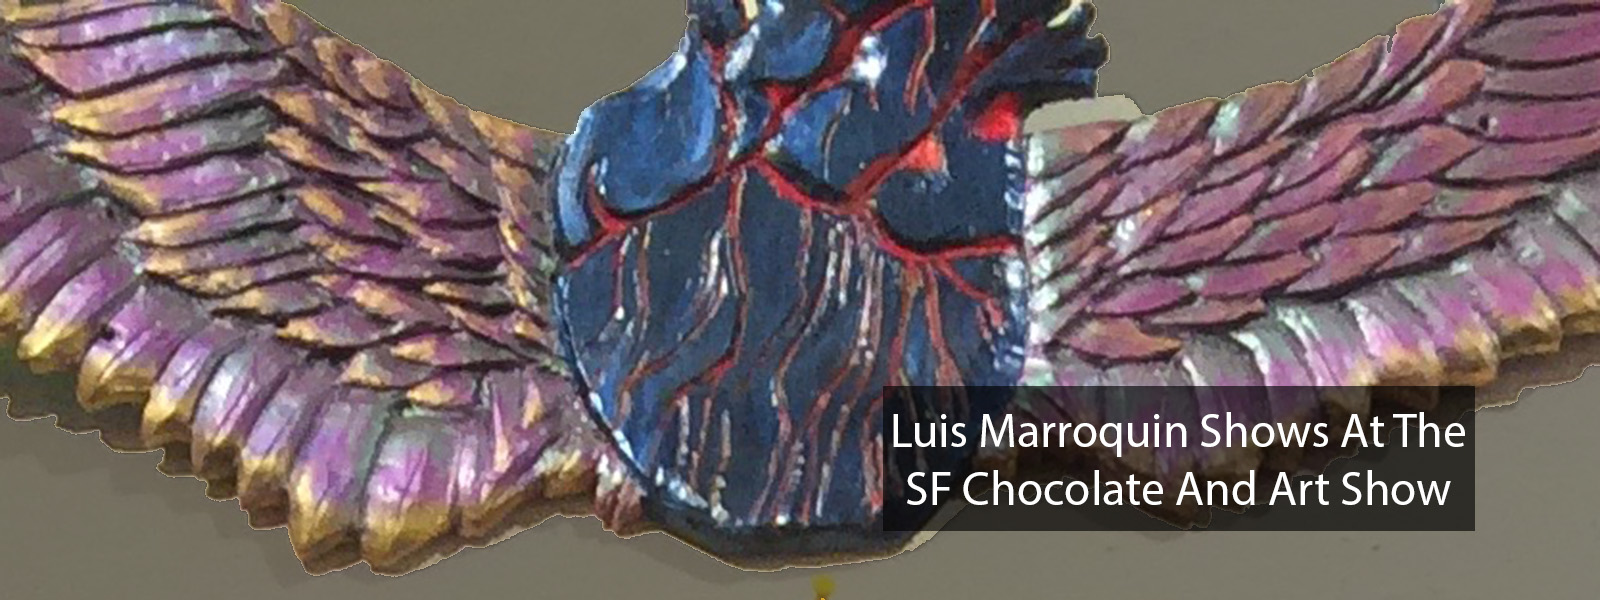 Luis Marroquin Shows At The SF Chocolate And Art Show